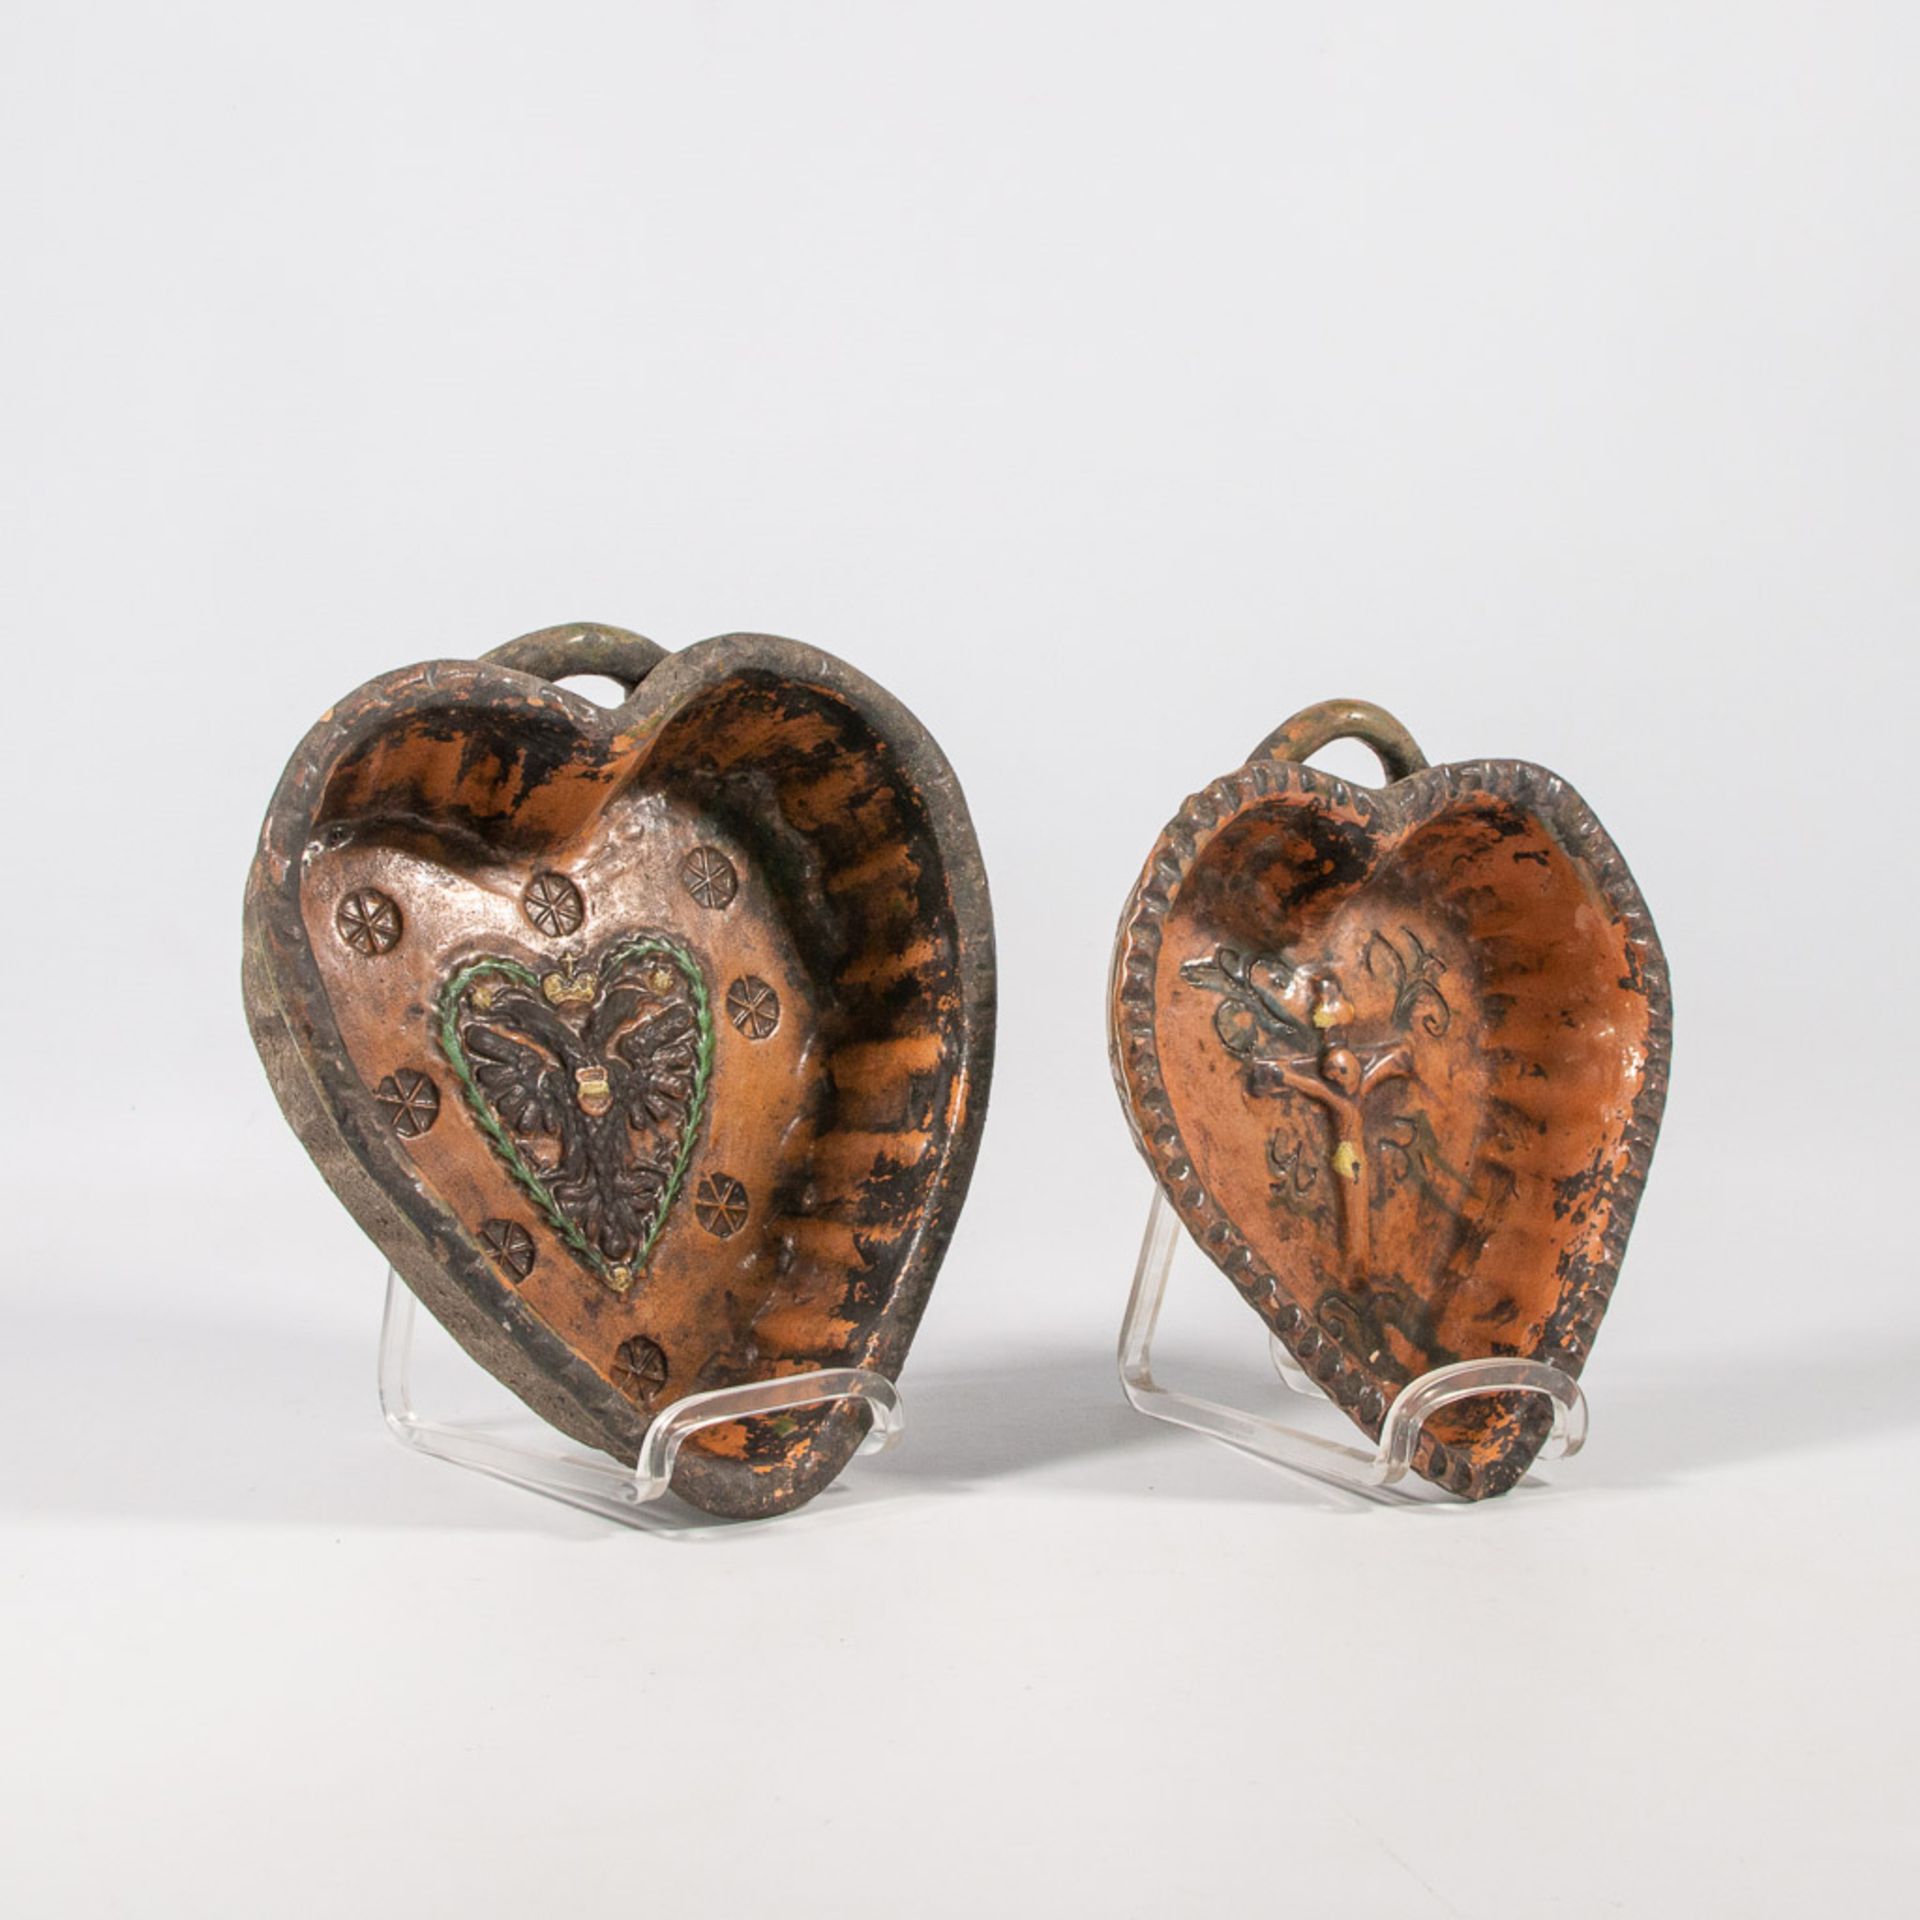 A Collection of 2 baking forms in shape of a heart - Image 9 of 27